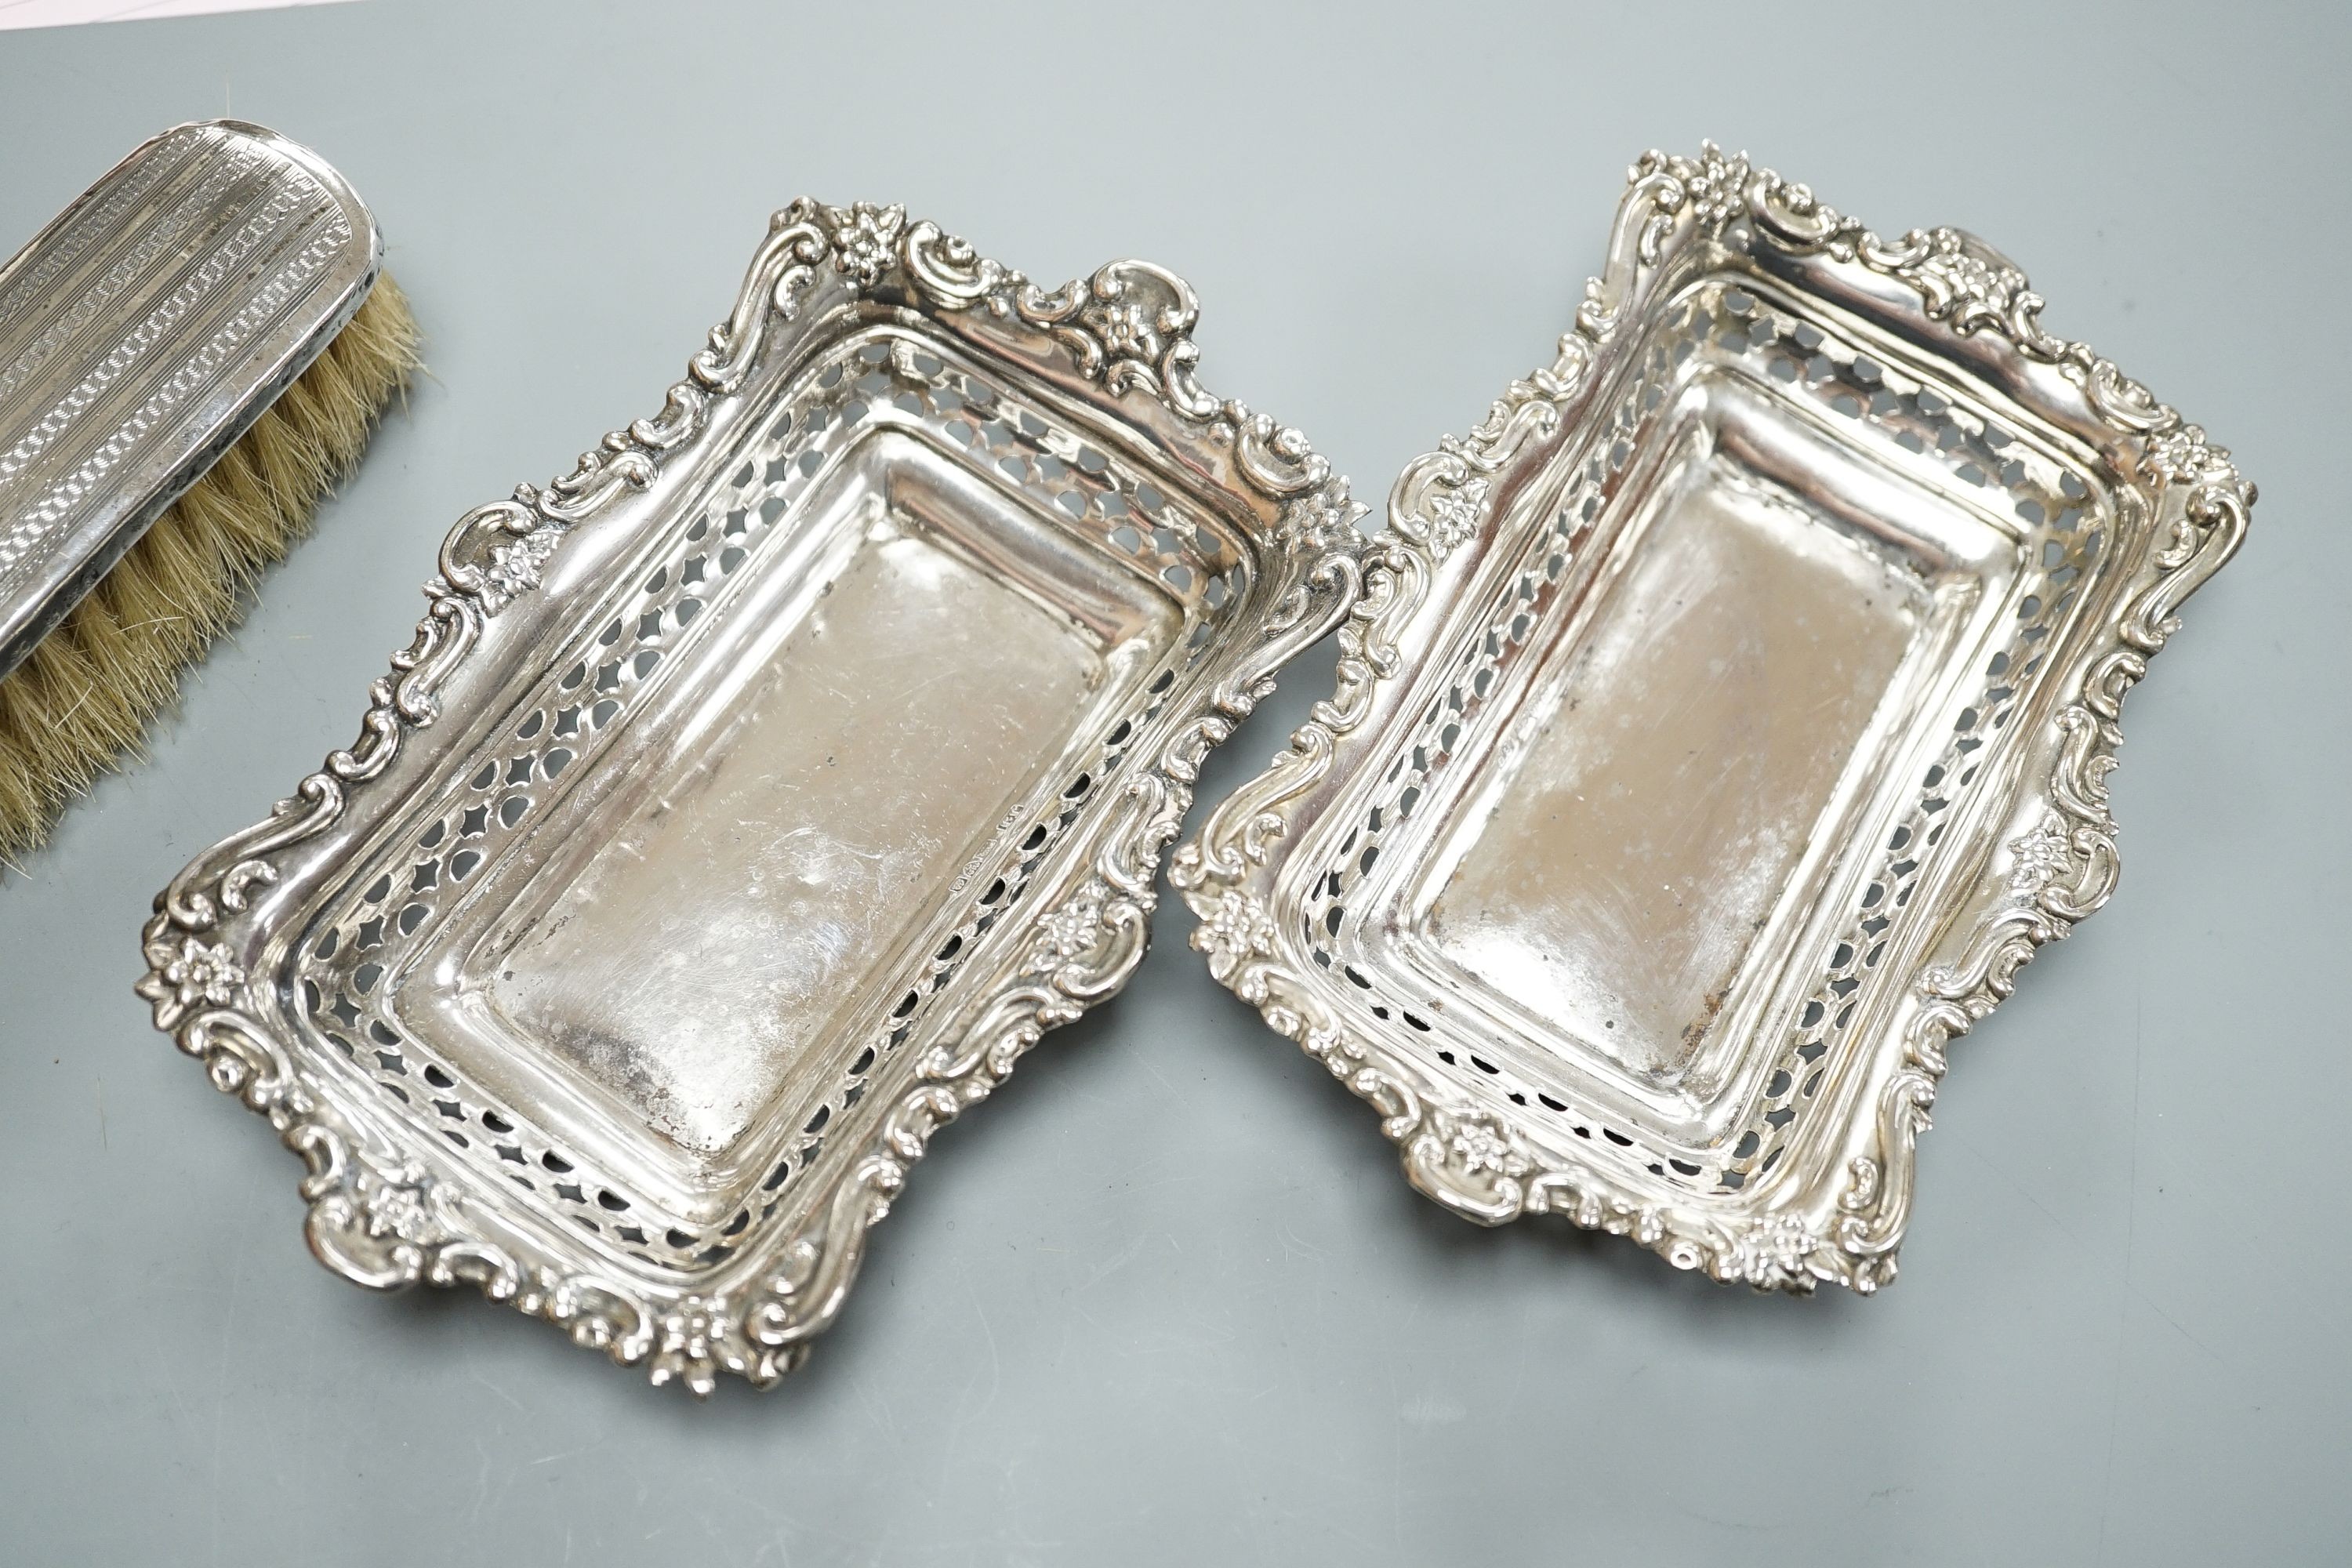 A pair of Edwardian pierced silver bonbon dishes, Chester, 1902, 16.1cm, 4.5oz, a silver and - Image 4 of 4